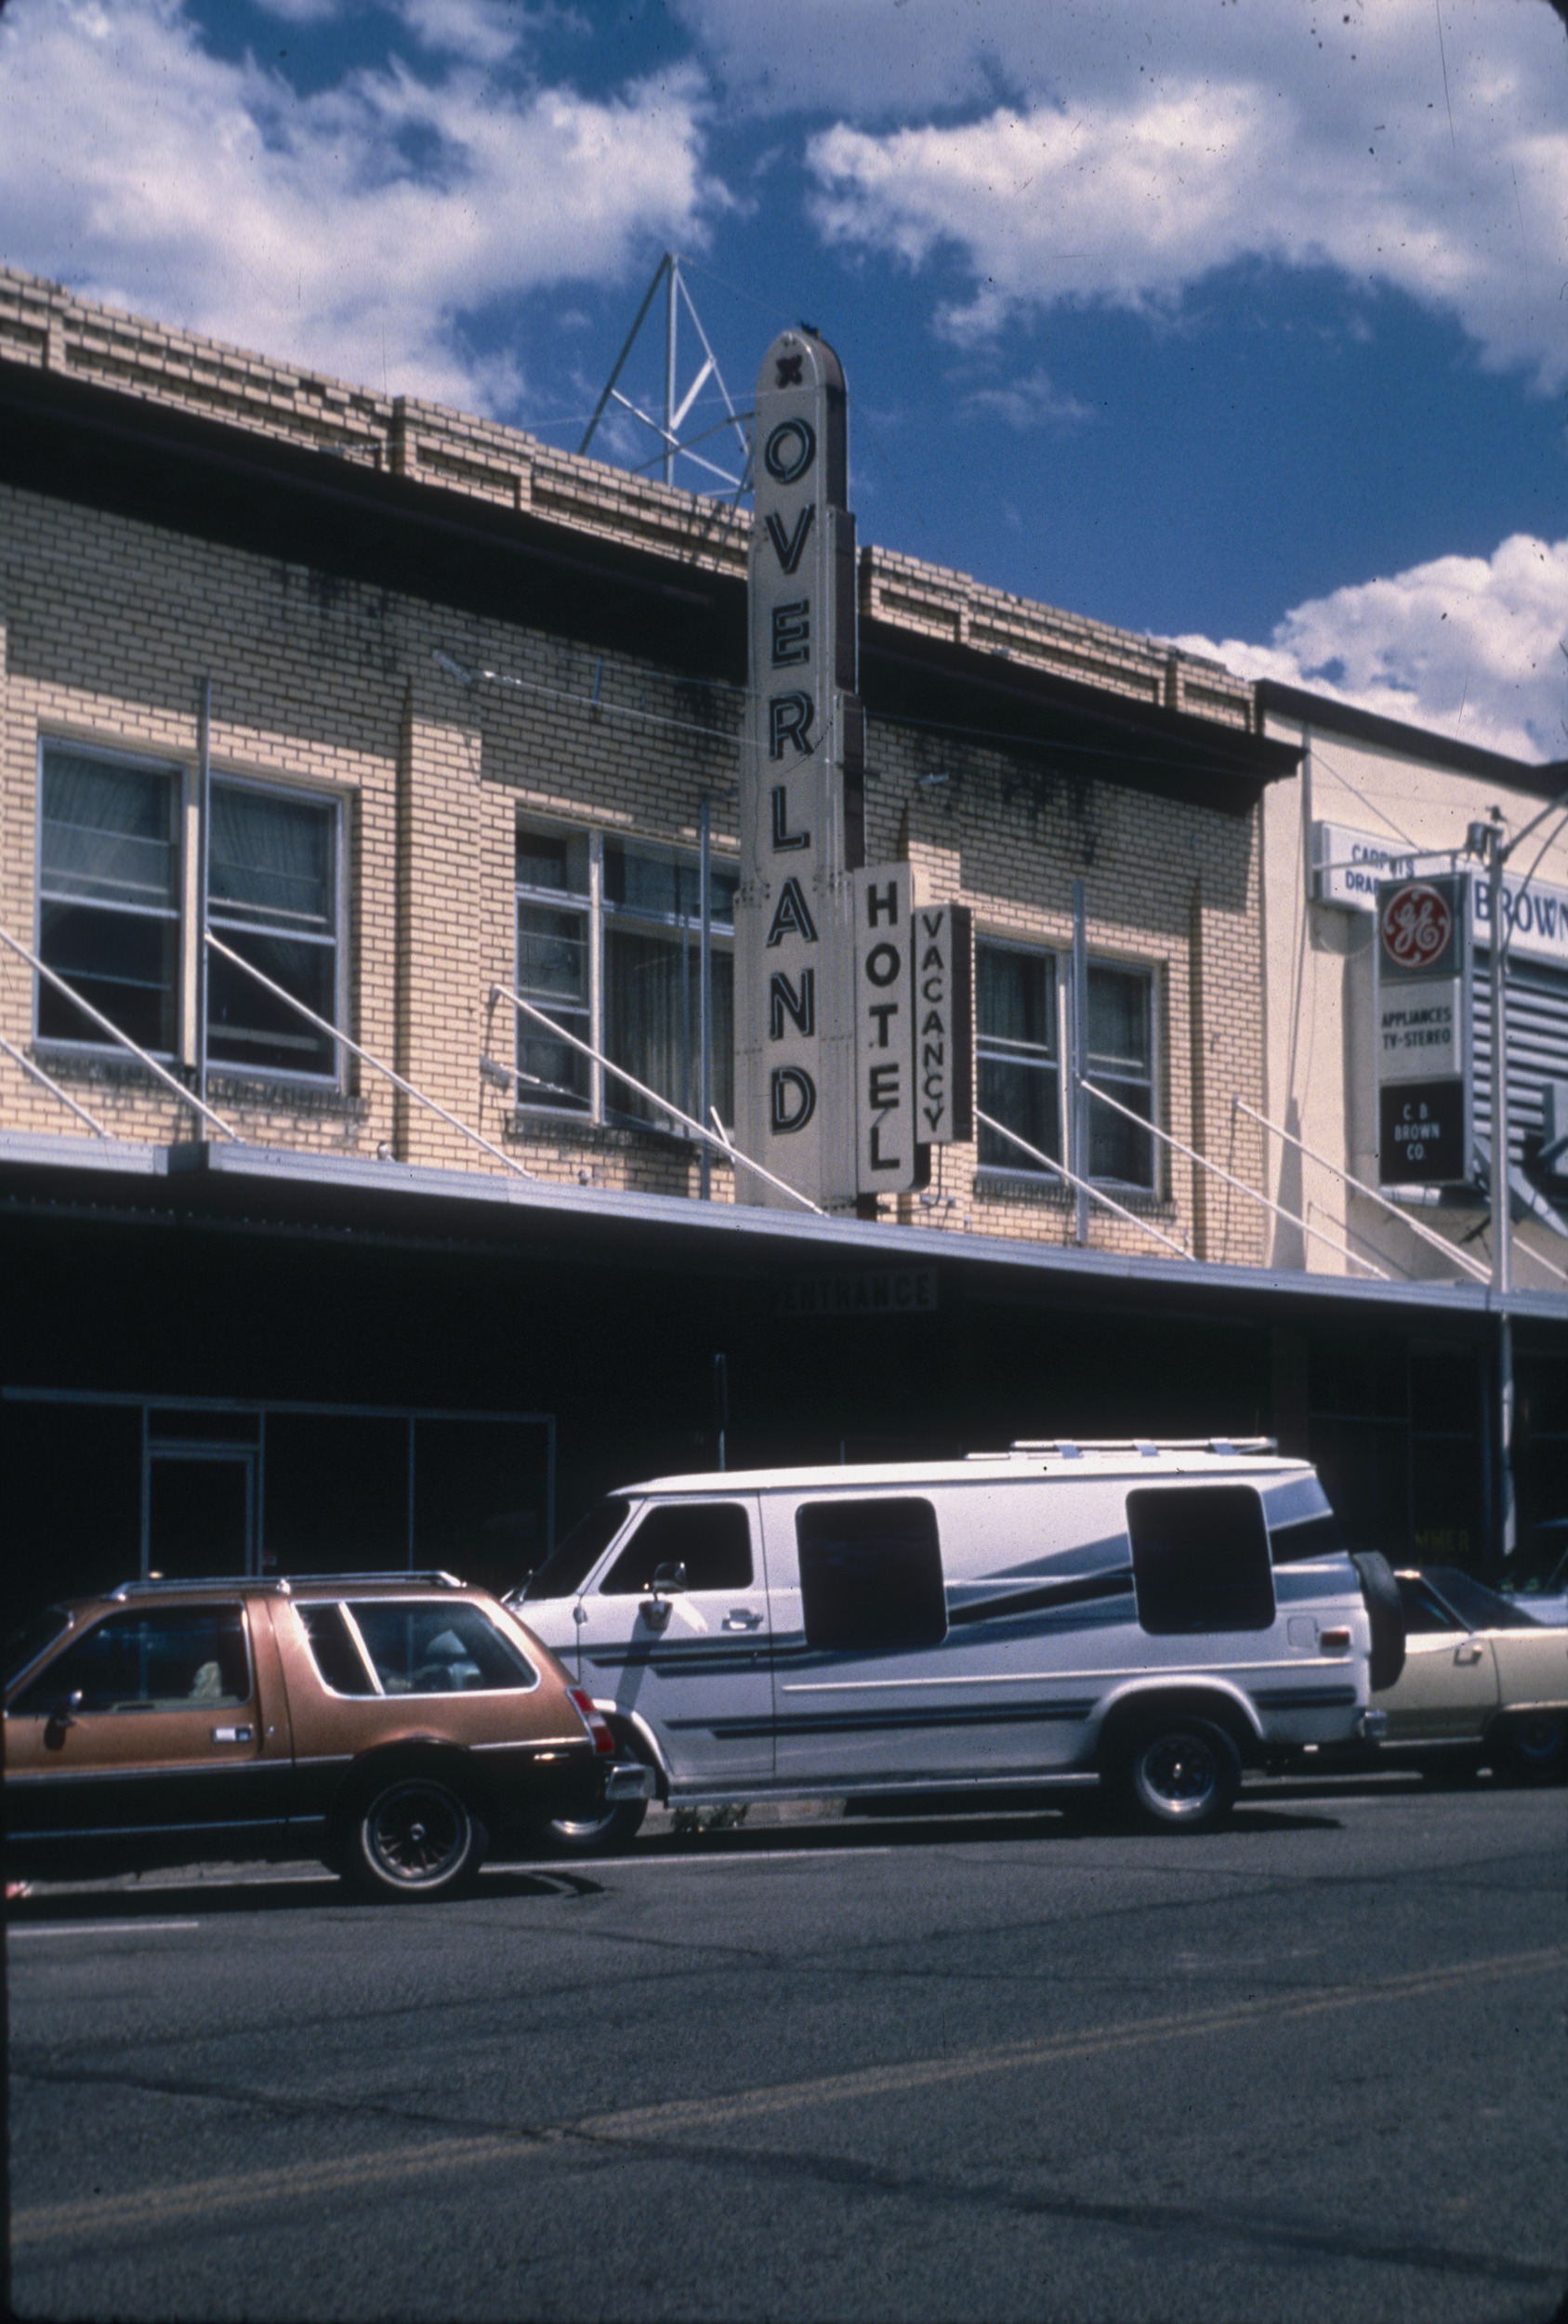 Slide of the Overland Hotel and its neon signs, Winnemucca, Nevada, 1986